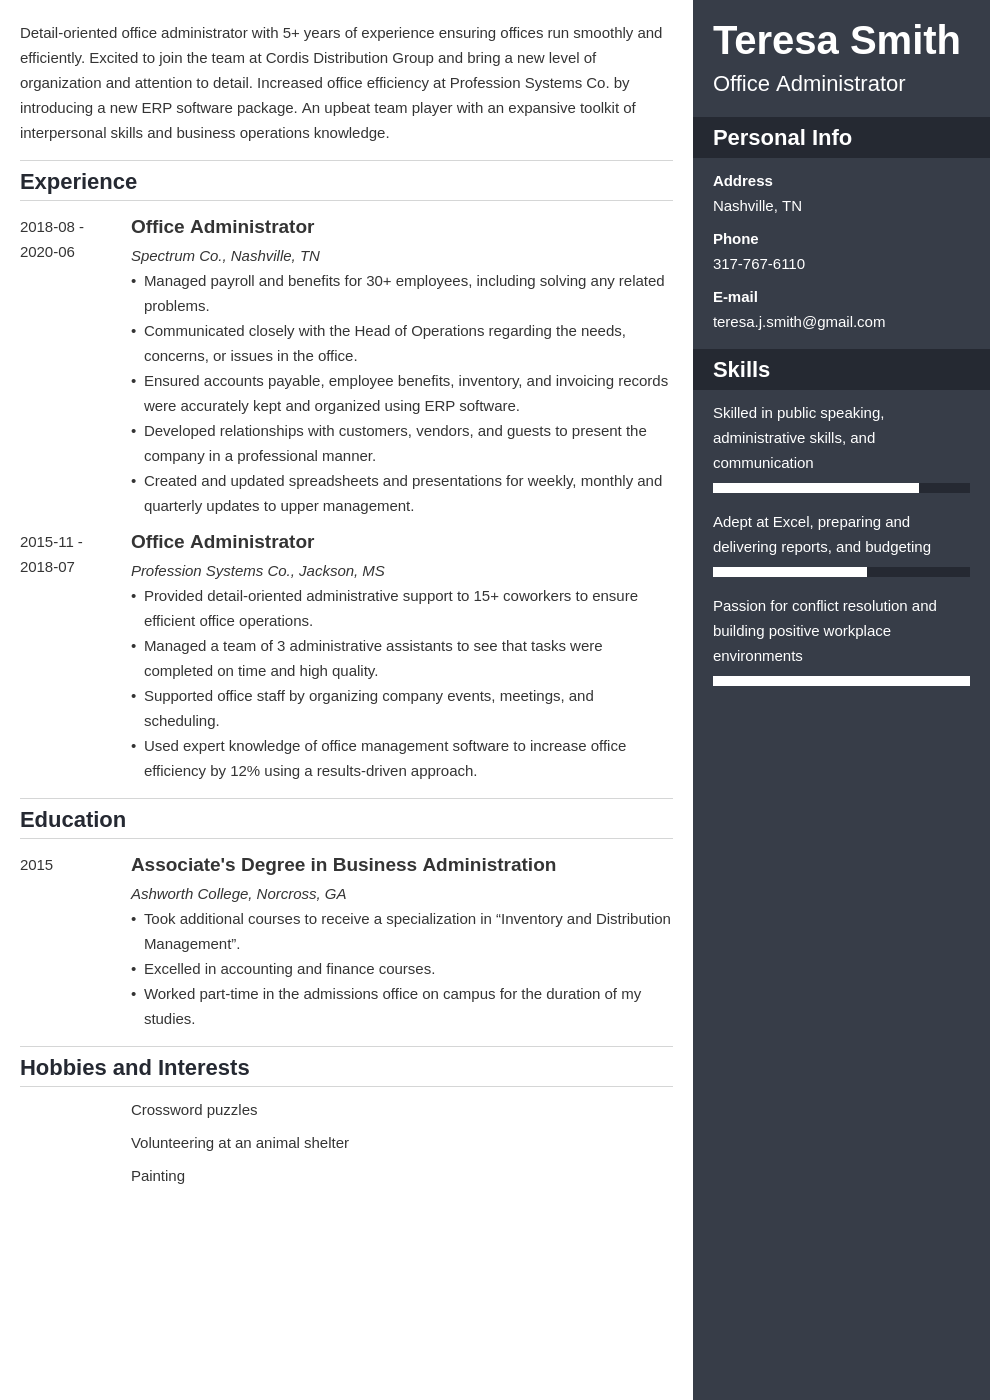 resume examples for office administrator